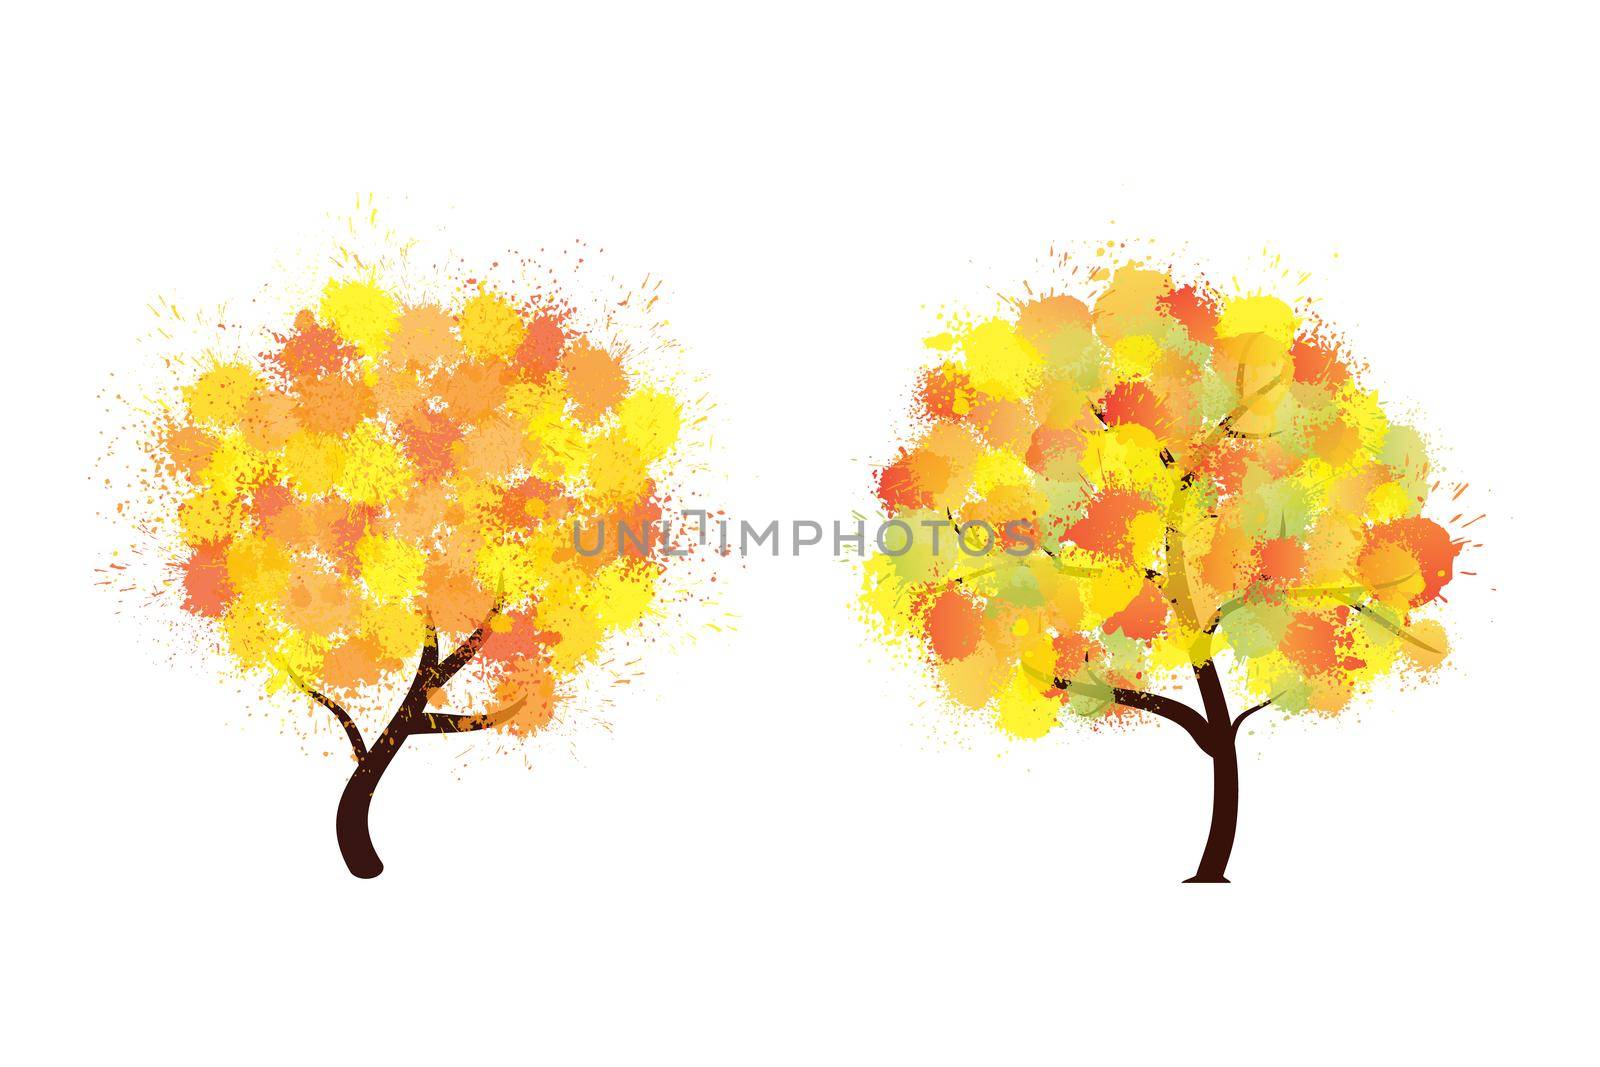 Autumn stylized trees forming by blots watercolor. Colorful paint splash trees with different abstract brush leaves. Eco design style symbols set. Jpeg illustration by Fyuriy